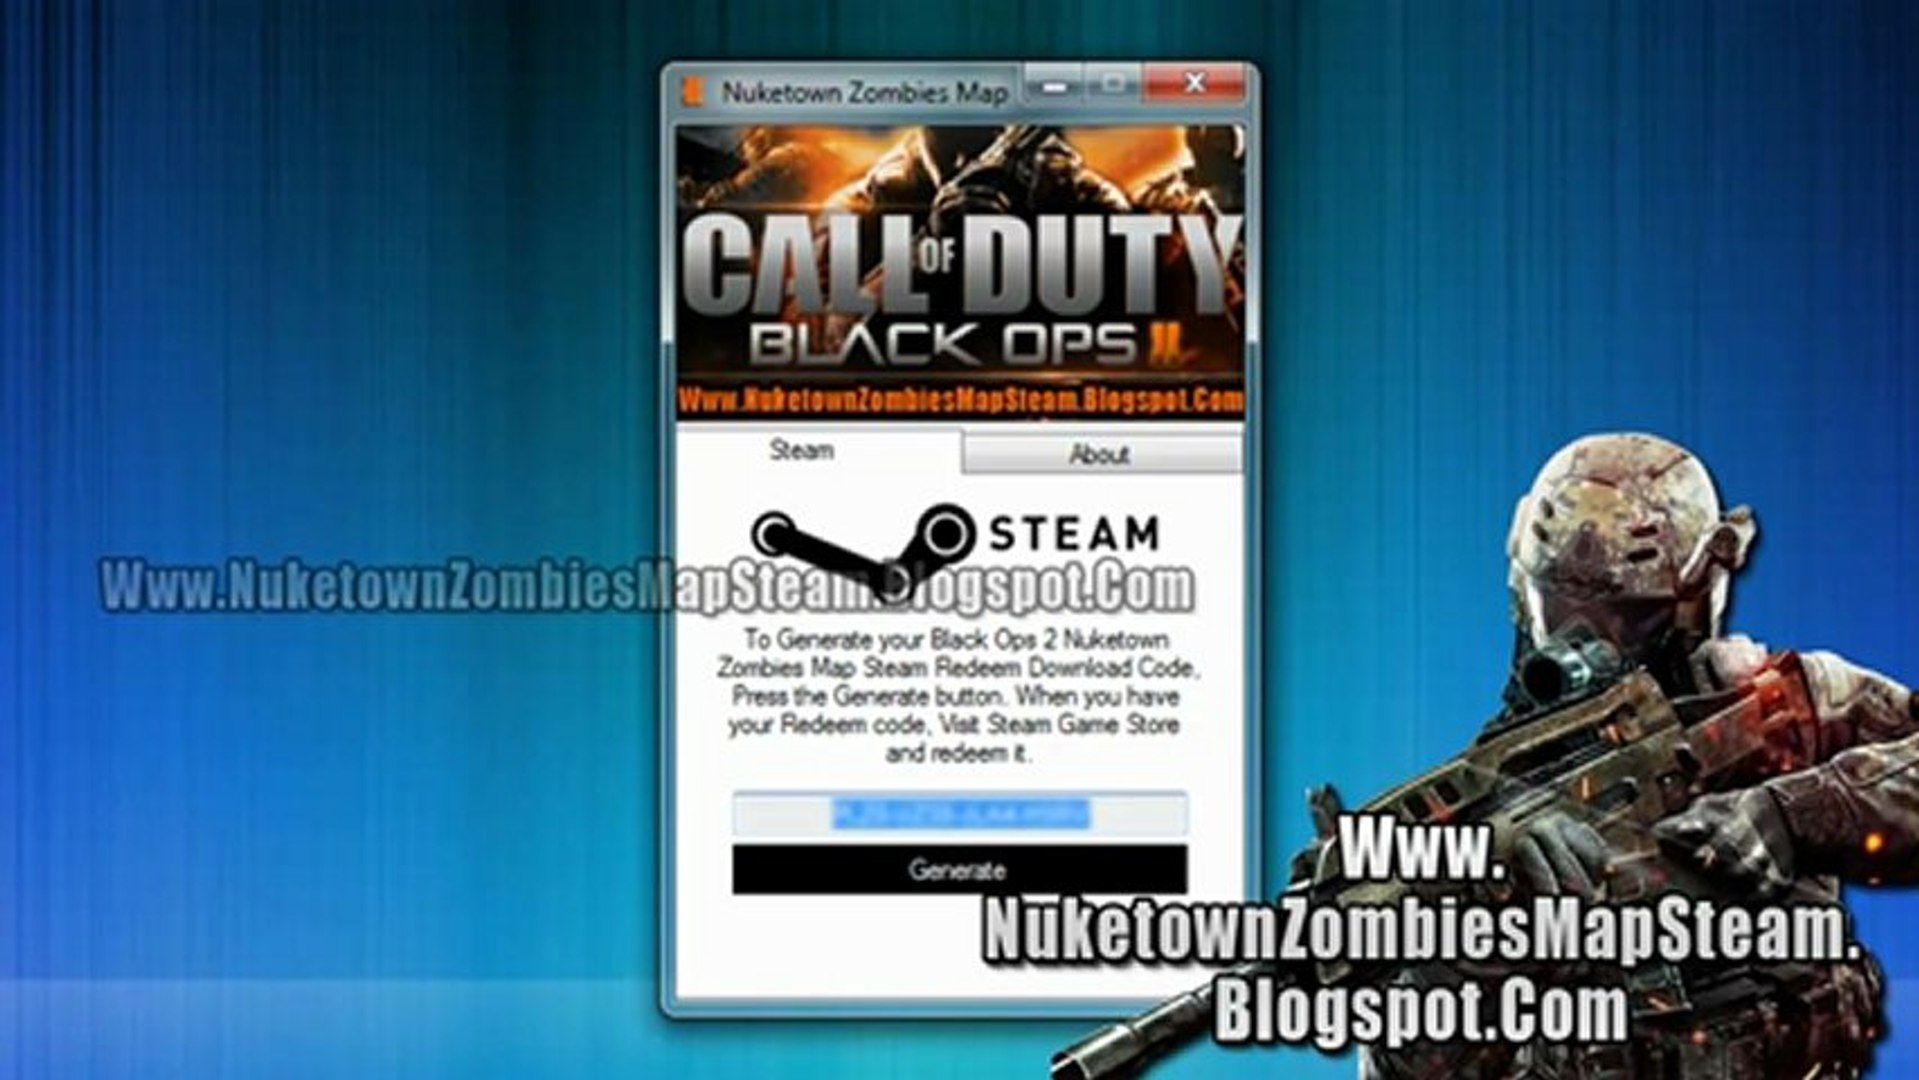 Download Black Ops 2 Nuketown Zombies Map Redeem Codes - video Dailymotion